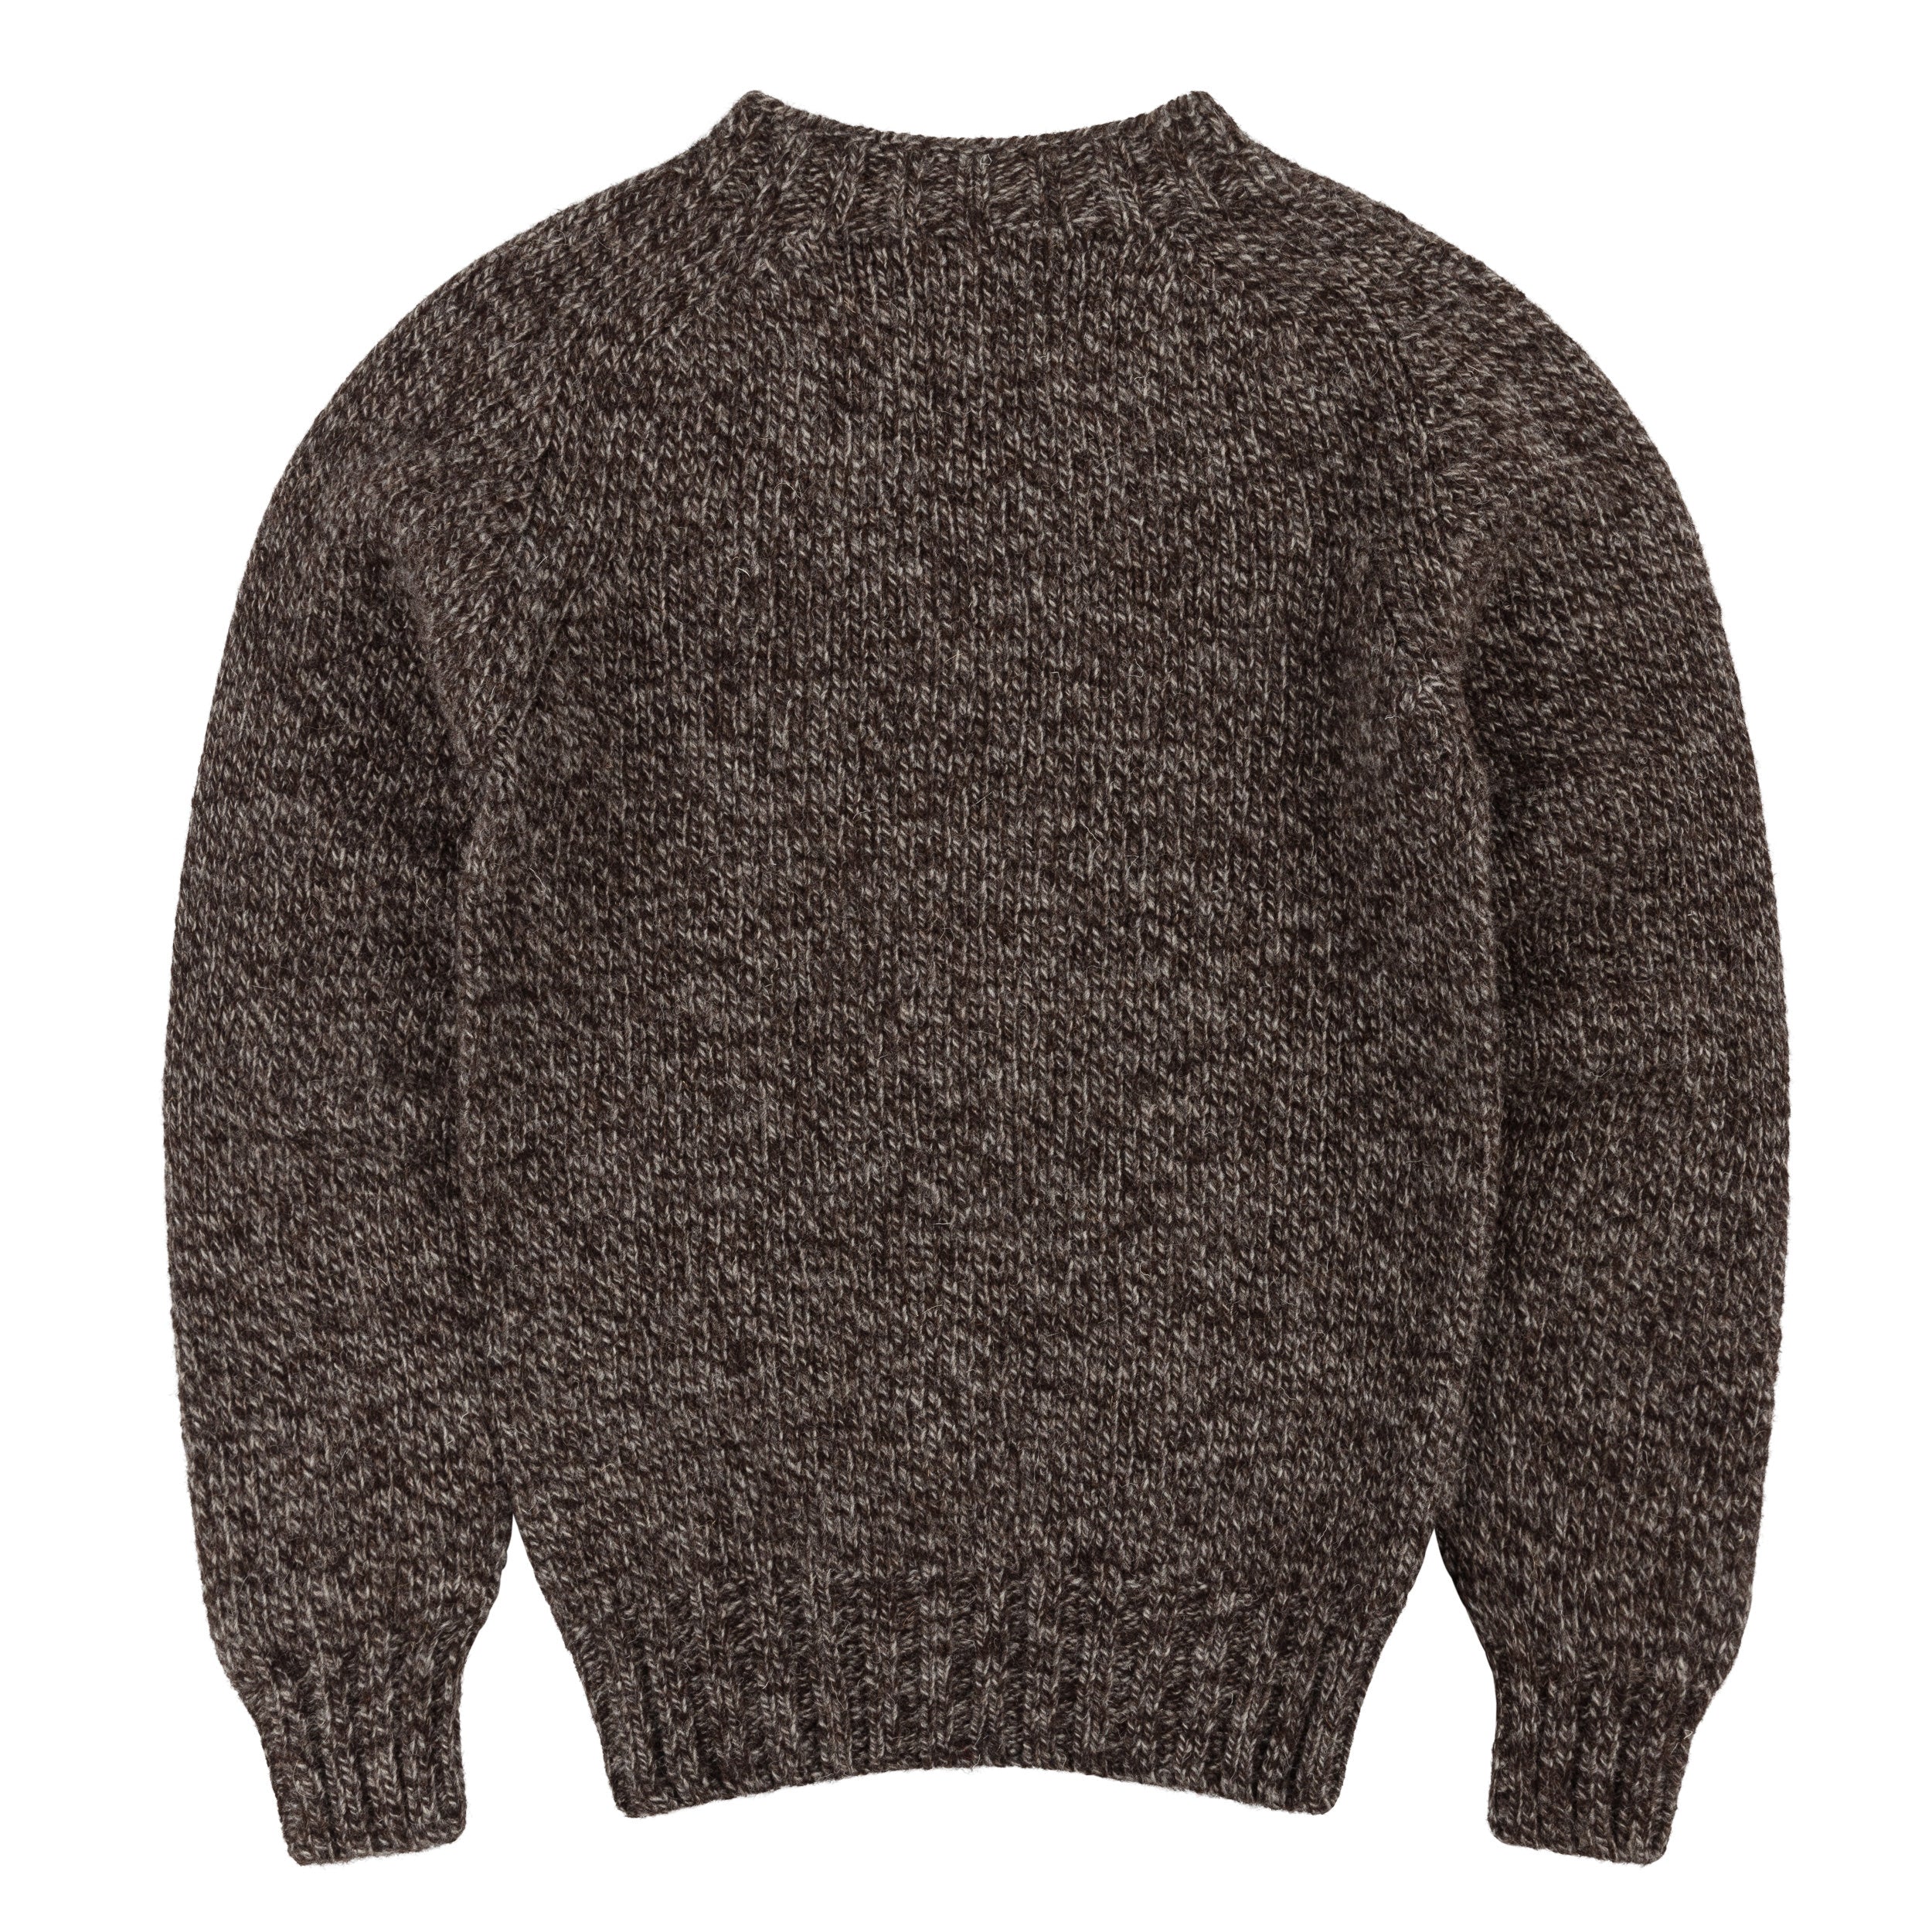 Carrier Company Heavy Heritage Breed Lambswool Jumper